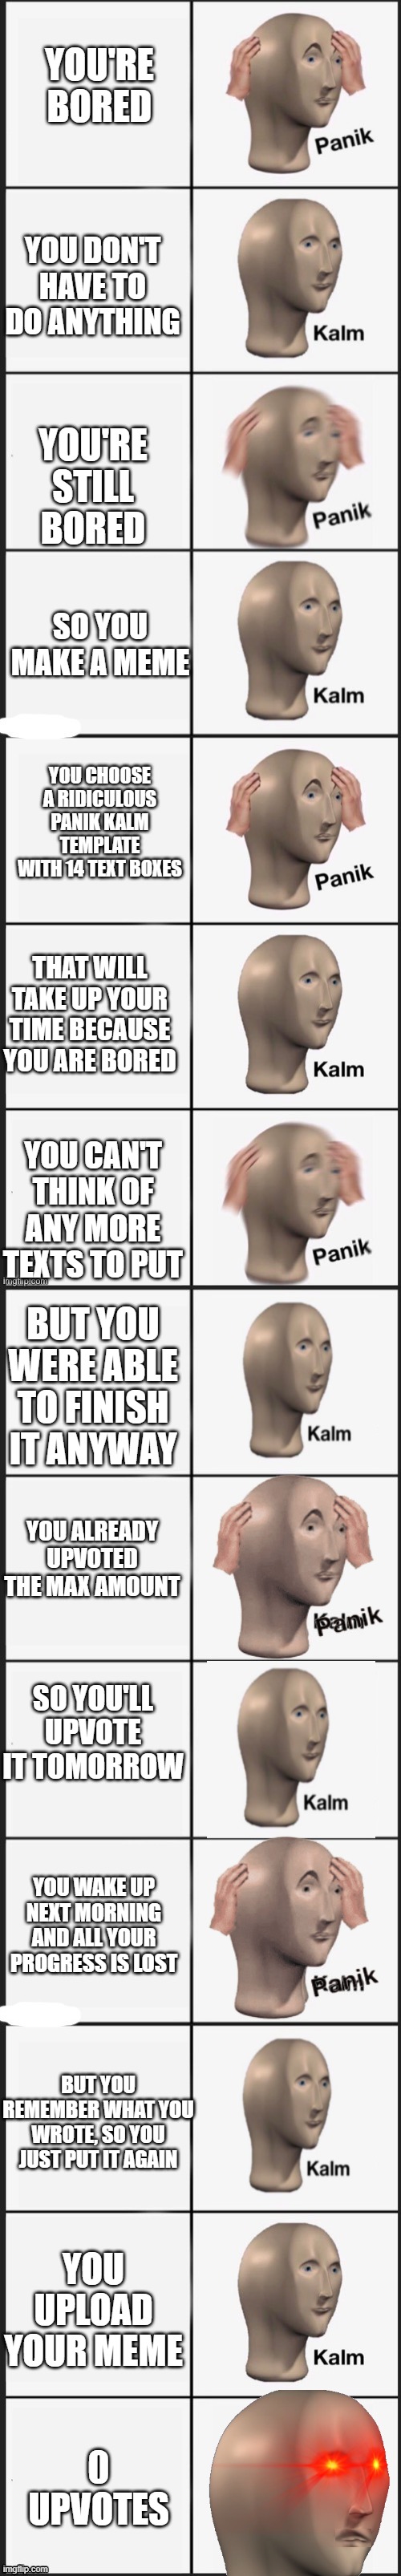 Panik Kalm Panik Kalm Panik Kalm Panik Kalm Panik Kalm Panik Kalm Kalm Triggered |  YOU'RE BORED; YOU DON'T HAVE TO DO ANYTHING; YOU'RE STILL BORED; SO YOU MAKE A MEME; YOU CHOOSE A RIDICULOUS PANIK KALM TEMPLATE WITH 14 TEXT BOXES; THAT WILL TAKE UP YOUR TIME BECAUSE YOU ARE BORED; YOU CAN'T THINK OF ANY MORE TEXTS TO PUT; BUT YOU WERE ABLE TO FINISH IT ANYWAY; YOU ALREADY UPVOTED THE MAX AMOUNT; SO YOU'LL UPVOTE IT TOMORROW; YOU WAKE UP NEXT MORNING AND ALL YOUR PROGRESS IS LOST; BUT YOU REMEMBER WHAT YOU WROTE, SO YOU JUST PUT IT AGAIN; YOU UPLOAD YOUR MEME; 0 UPVOTES | image tagged in panik kalm panik,angery,no upvotes,memes,making memes,imgflip users | made w/ Imgflip meme maker